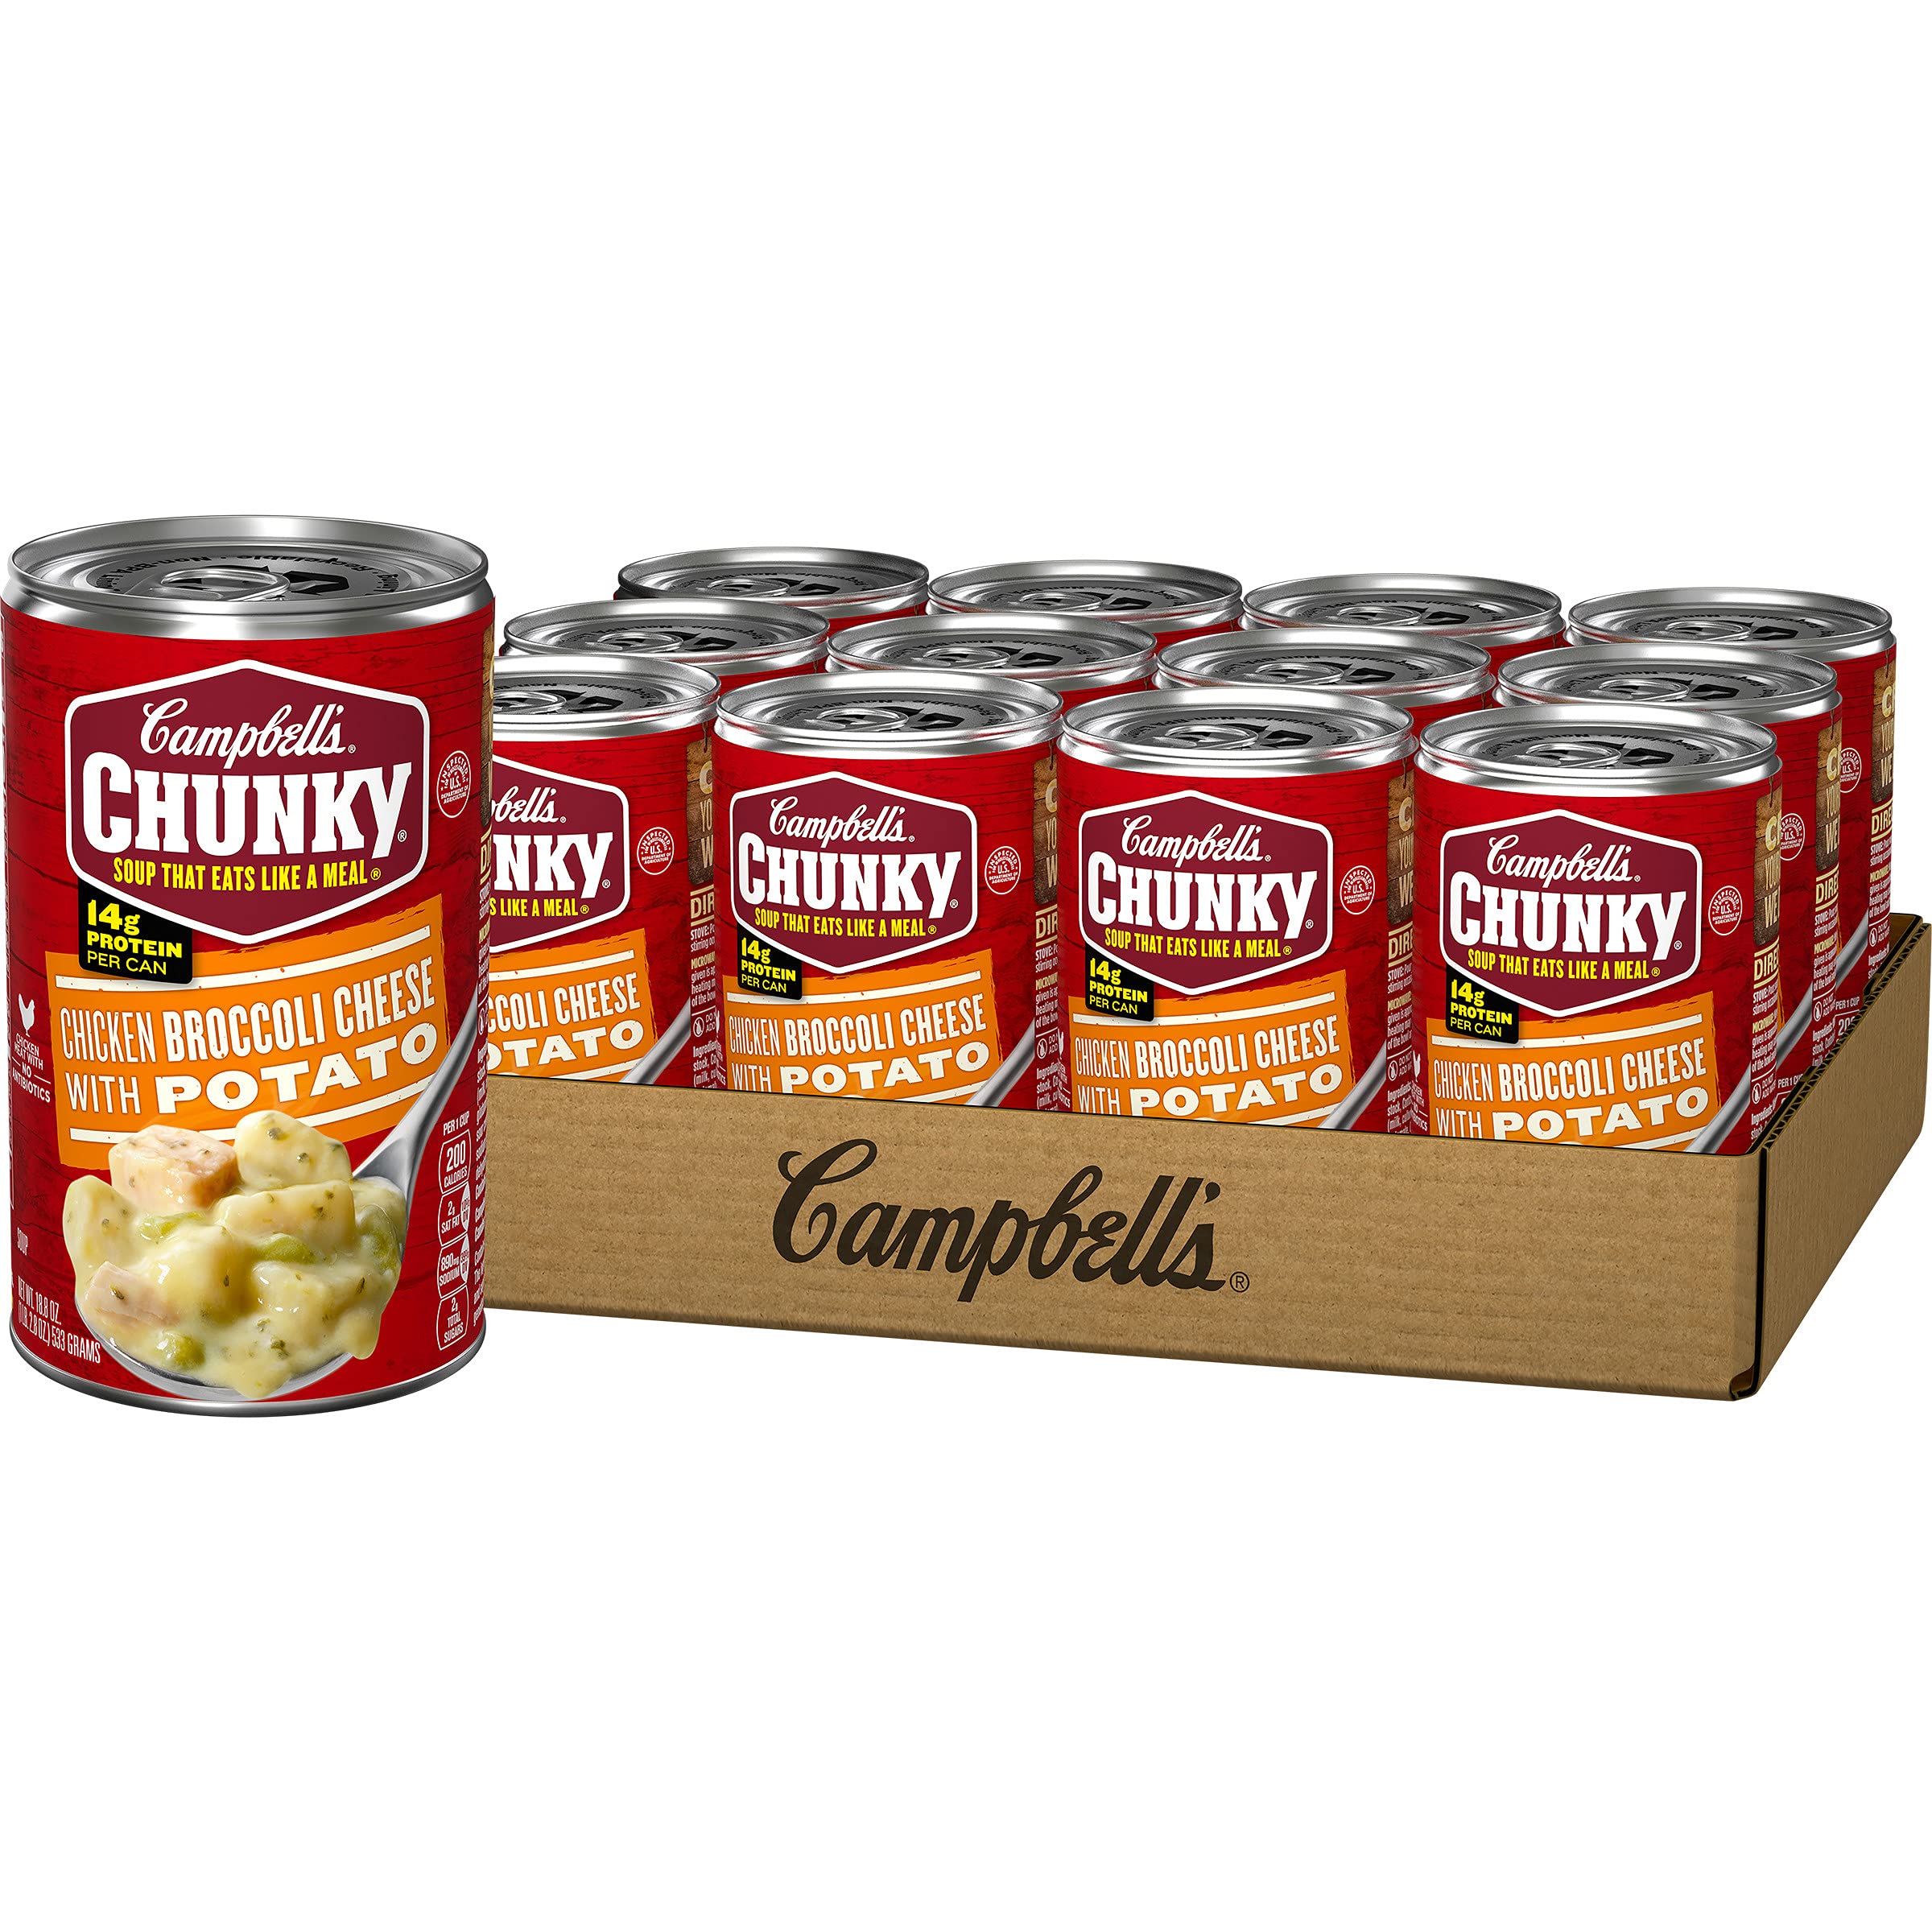 Campbell's Chunky Soup, Chicken Broccoli Cheese with Potato Soup, 18.8 Ounce Can (12 Pack)